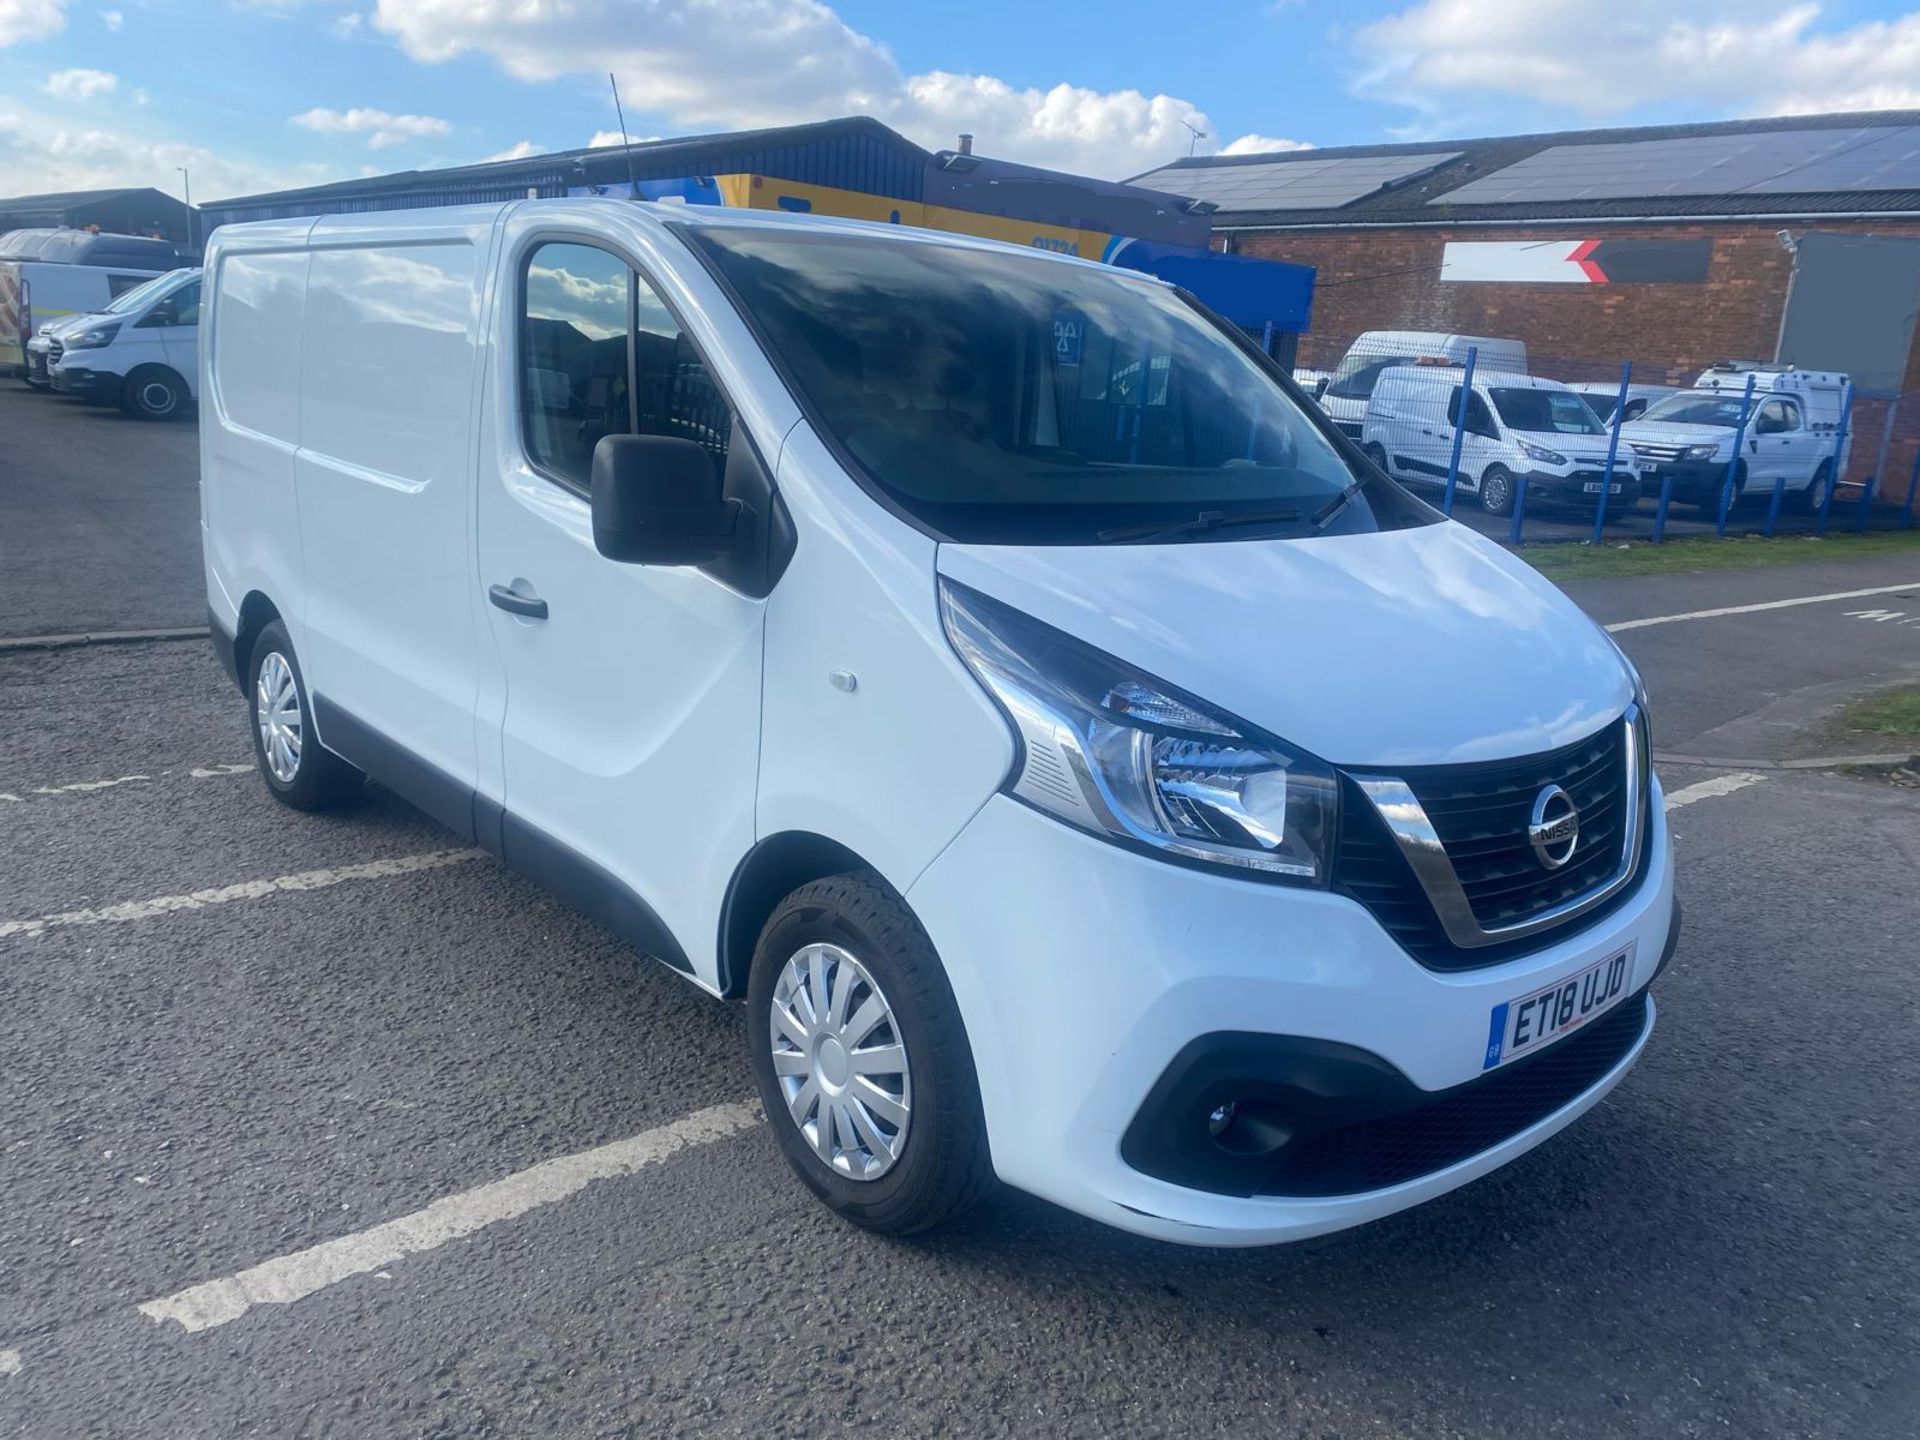 2018 18 NISSAN NV300 PANEL VAN - 106K MILES - AIR CON - EURO 6 - PLY LINED